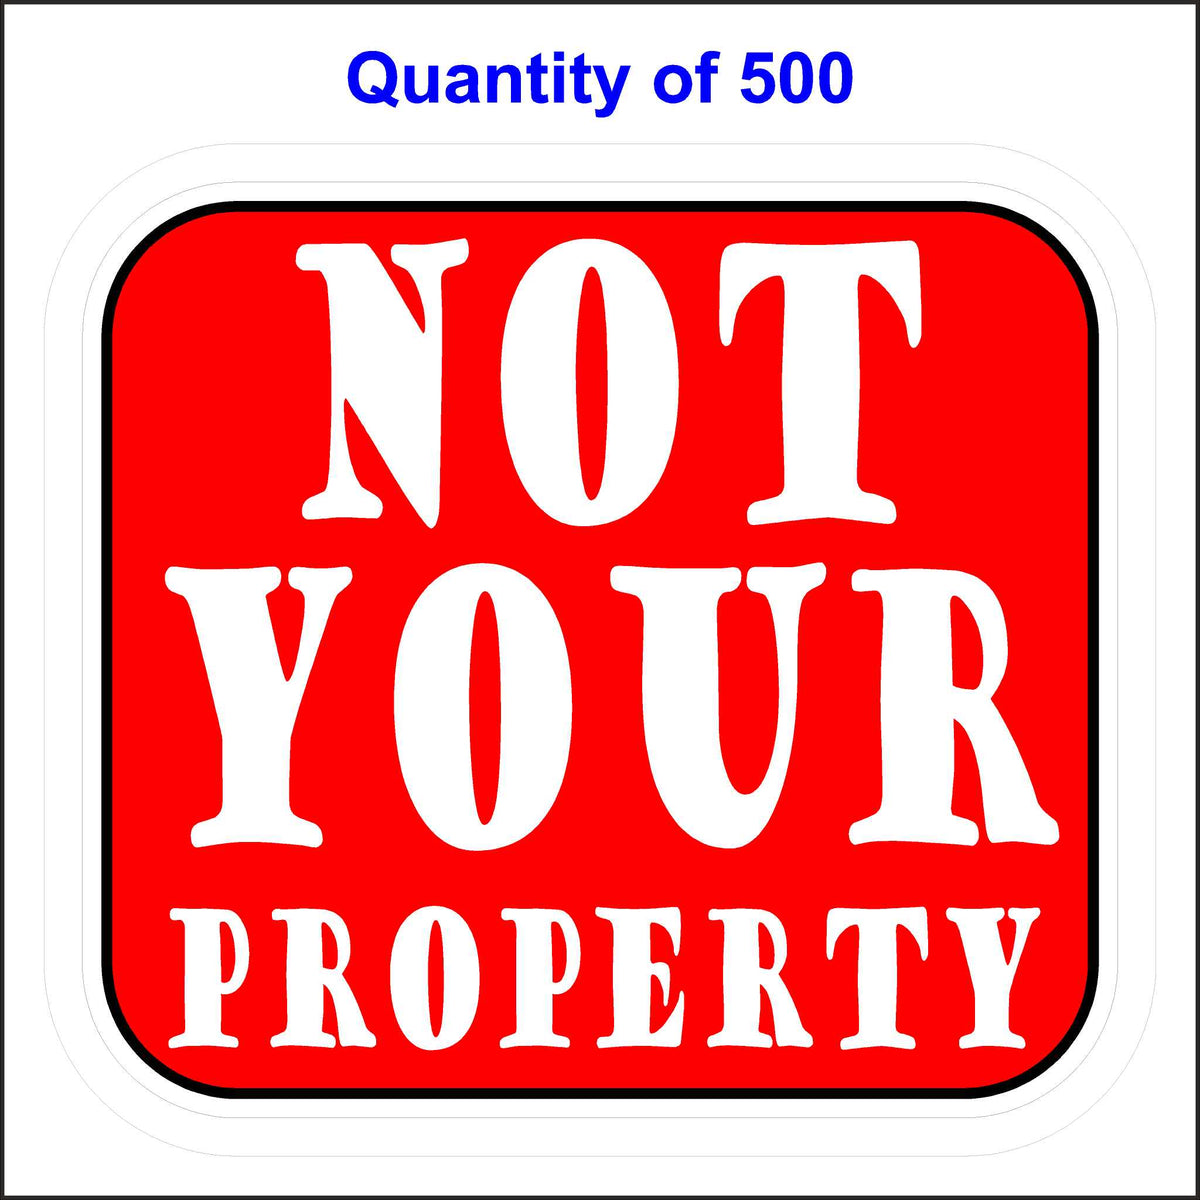 Not Your Property Sticker. Red Background With White Lettering. 500 Quantity.